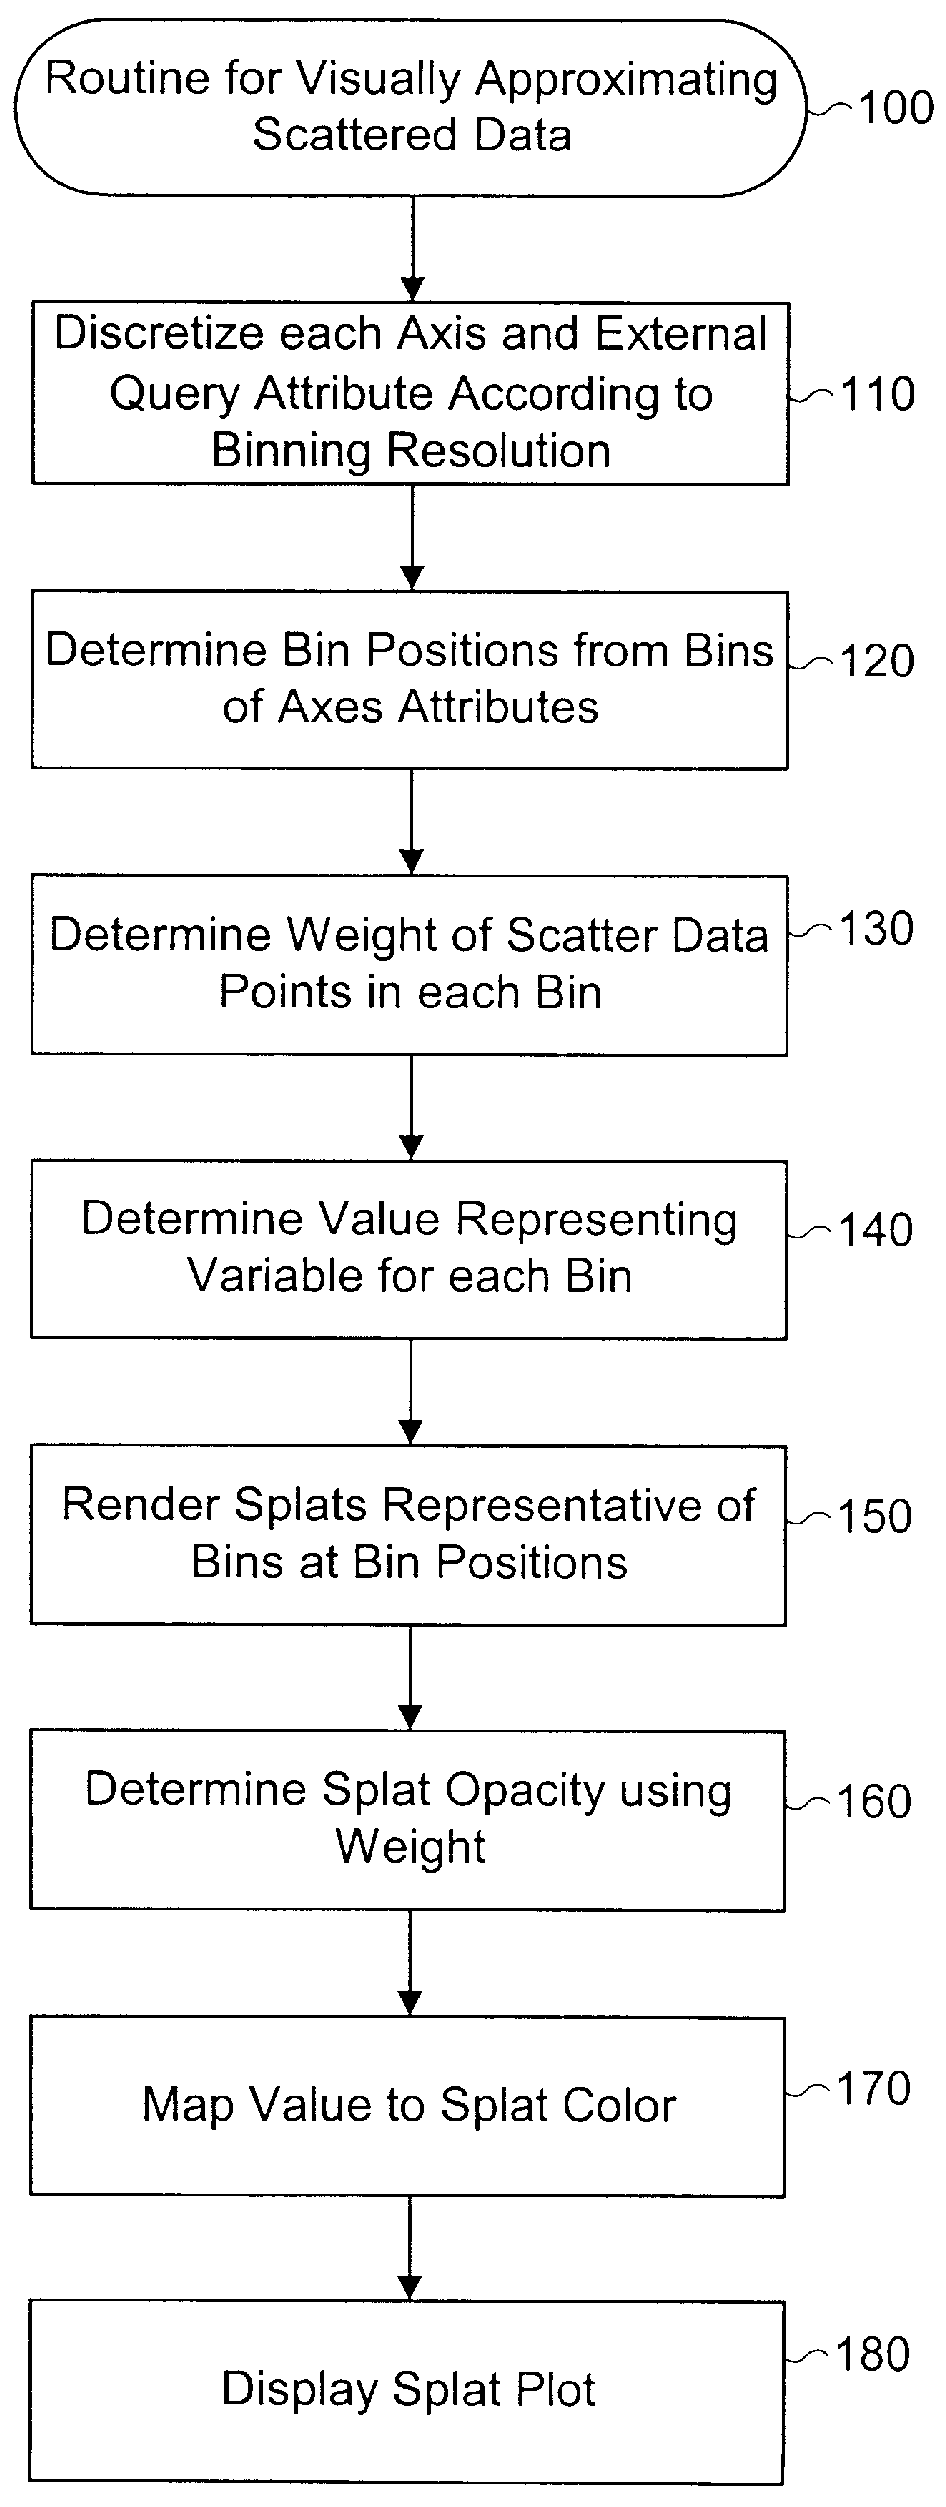 Interpolation between relational tables for purposes of animating a data visualization